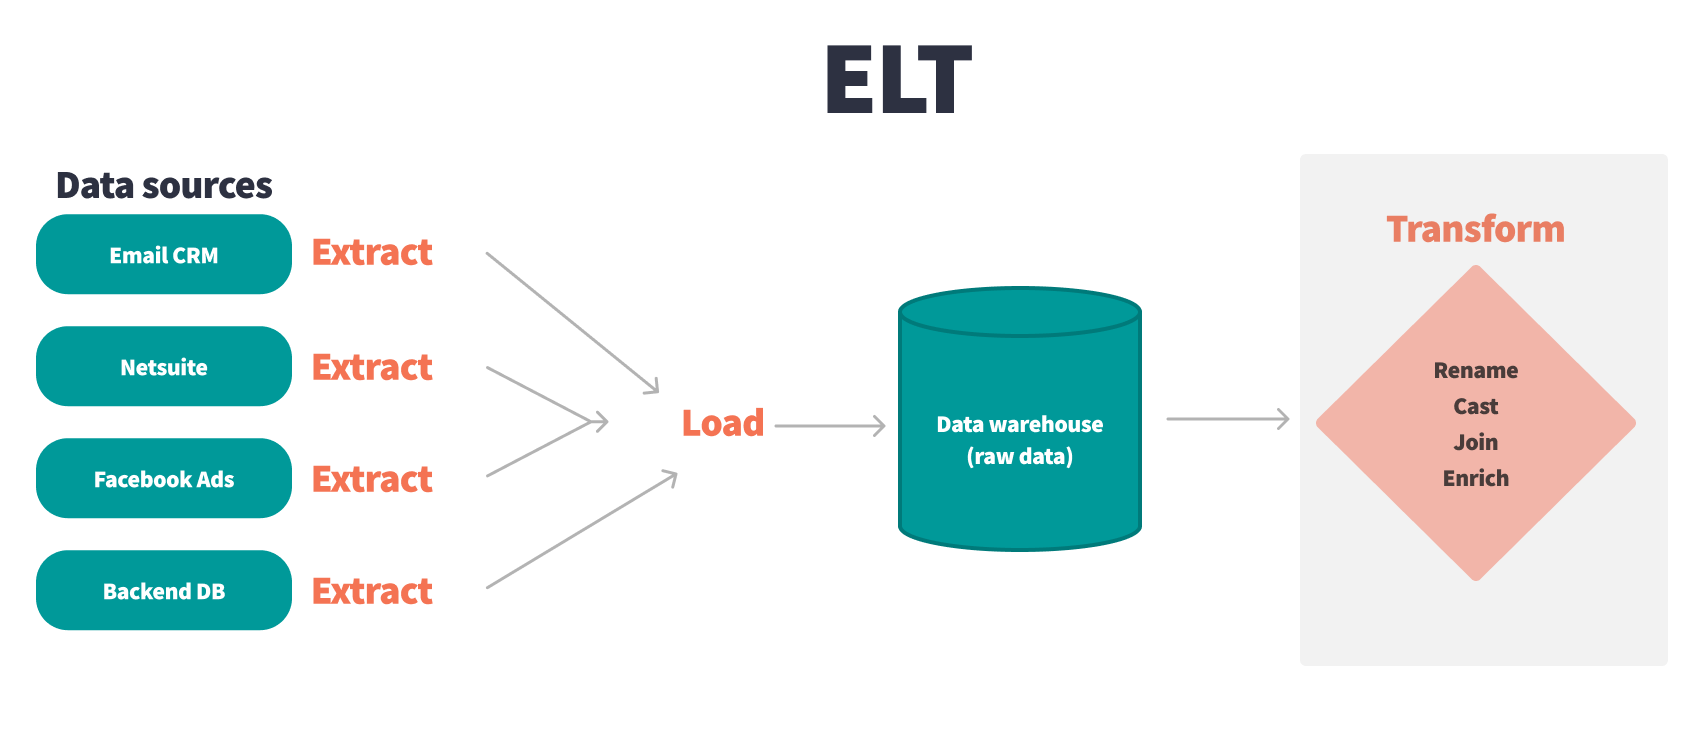 This diagram depicts the ELT process. This process begins with extracting raw data from your data sources. This data typically comes from sources like your Email CRM, financial accounting platforms, Ad platfoms, and backend databases. Then, the raw data is loaded directly into the data warehouse. Finally, the raw data is transformed and modeled. This typically involves renaming, casting, joining, and enriching the data until it's in a state that meets stakeholder needs.